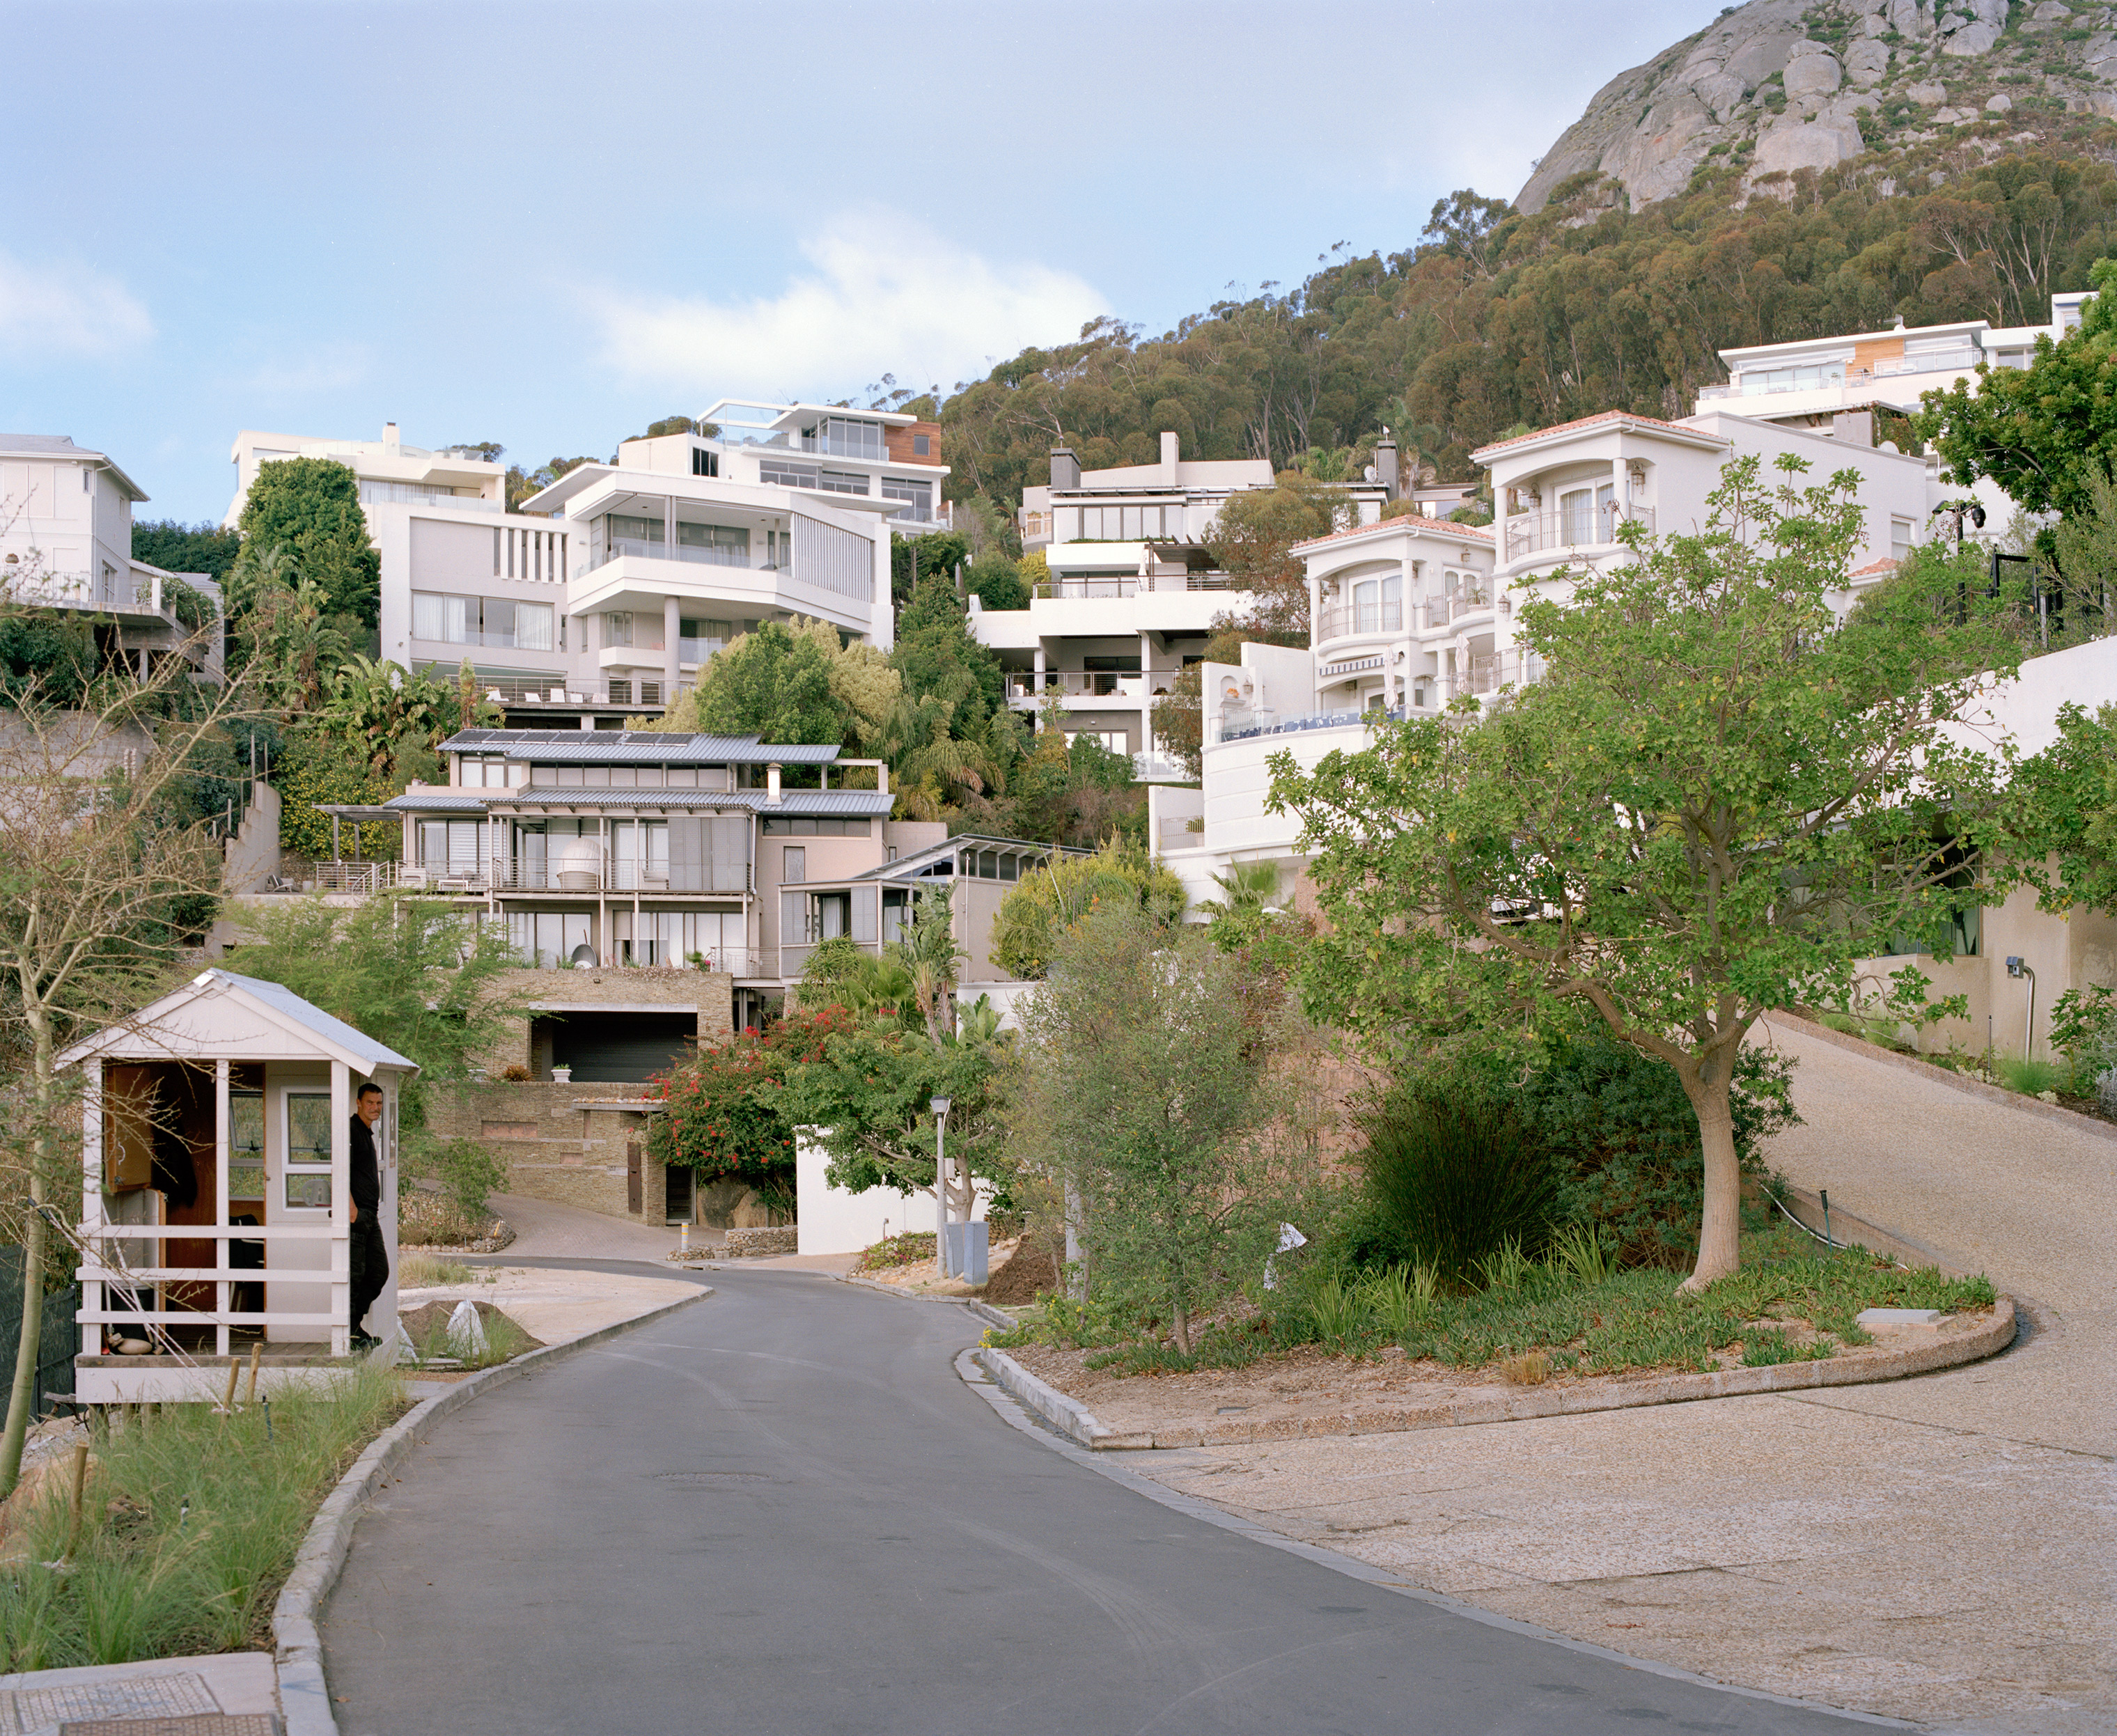 Bantry Bay, an affluent suburb of Cape Town, overlooks a rocky coastline. (Sarah Nankin for TIME)